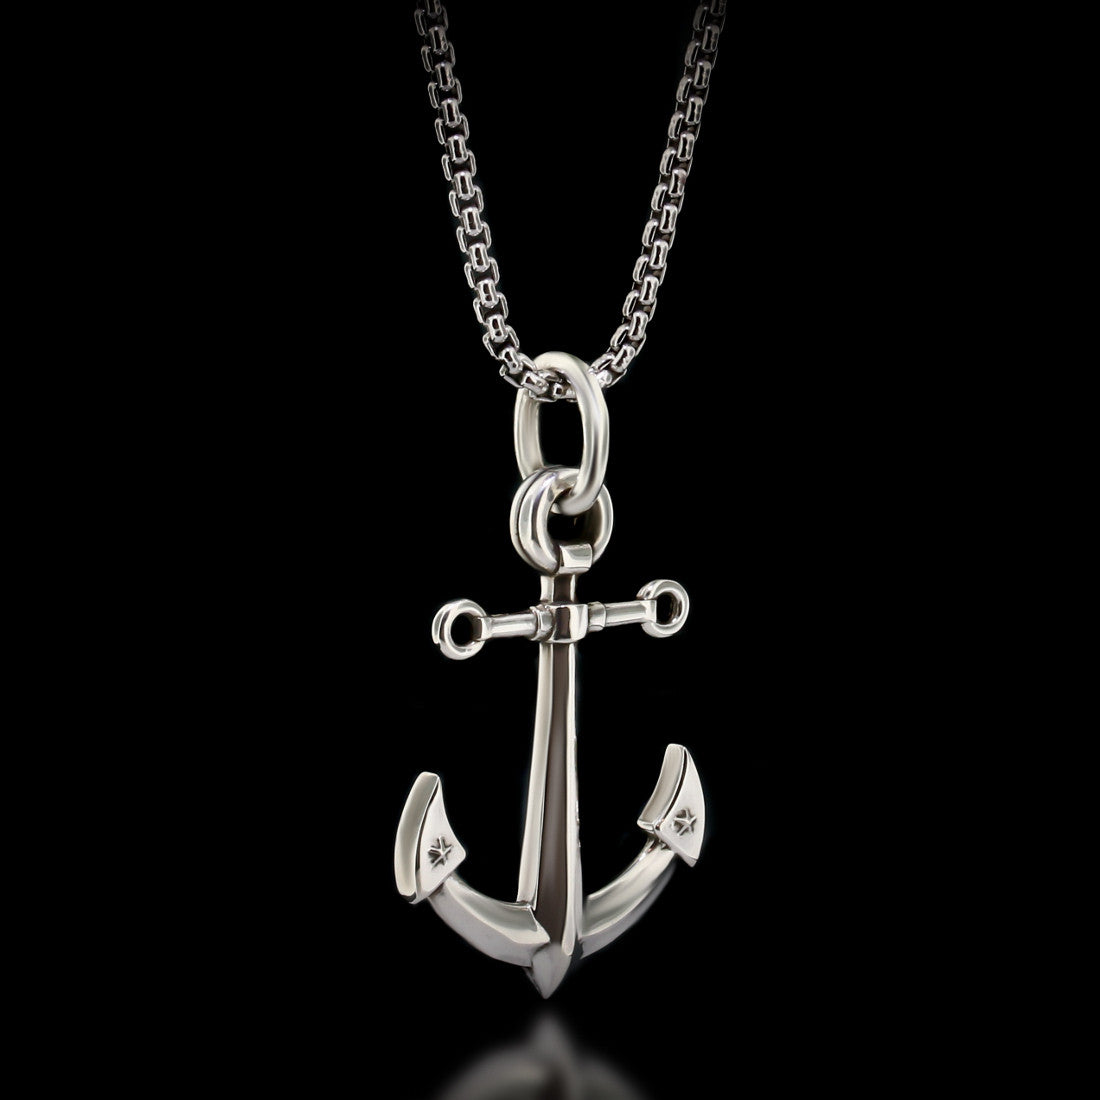 Anish Silver Metal Biker Ship Captain Wheel Rudder With Pirate Anchor  Nautical Charm With Box Chain